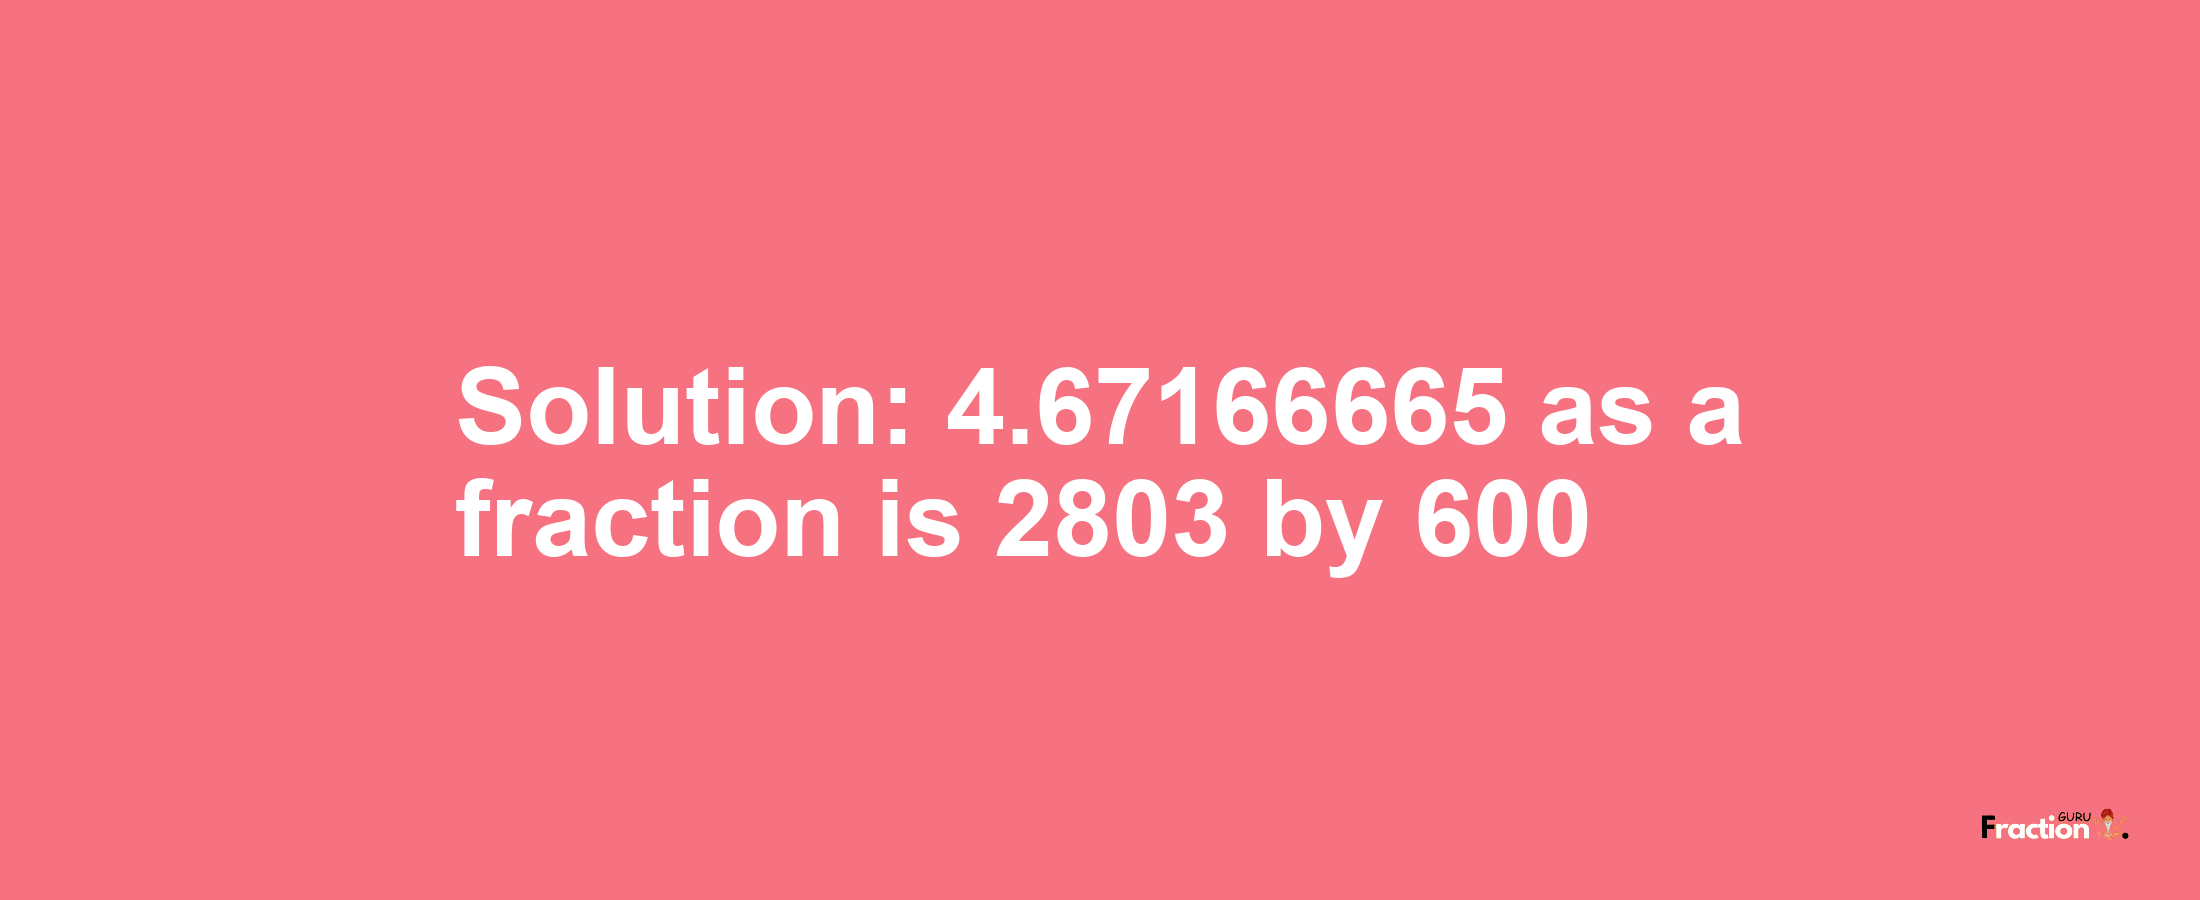 Solution:4.67166665 as a fraction is 2803/600